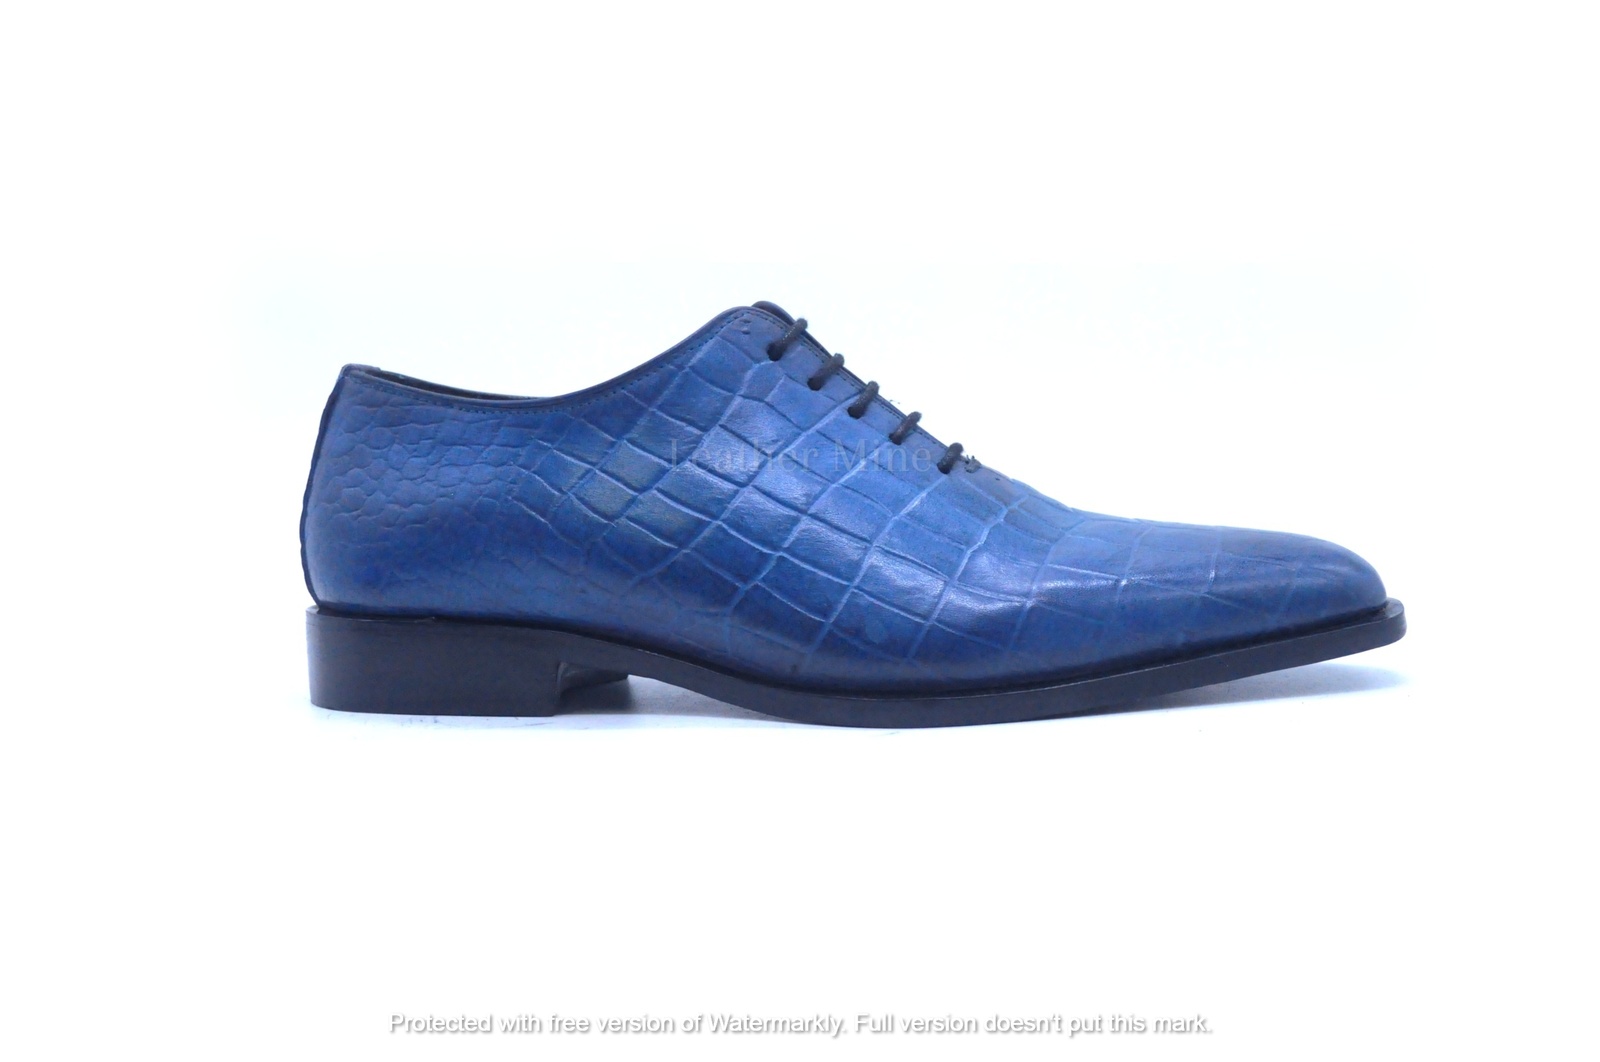 Leather Mine - Blue patina croc oxfords dress shoes for men, genuine leather custom shoes